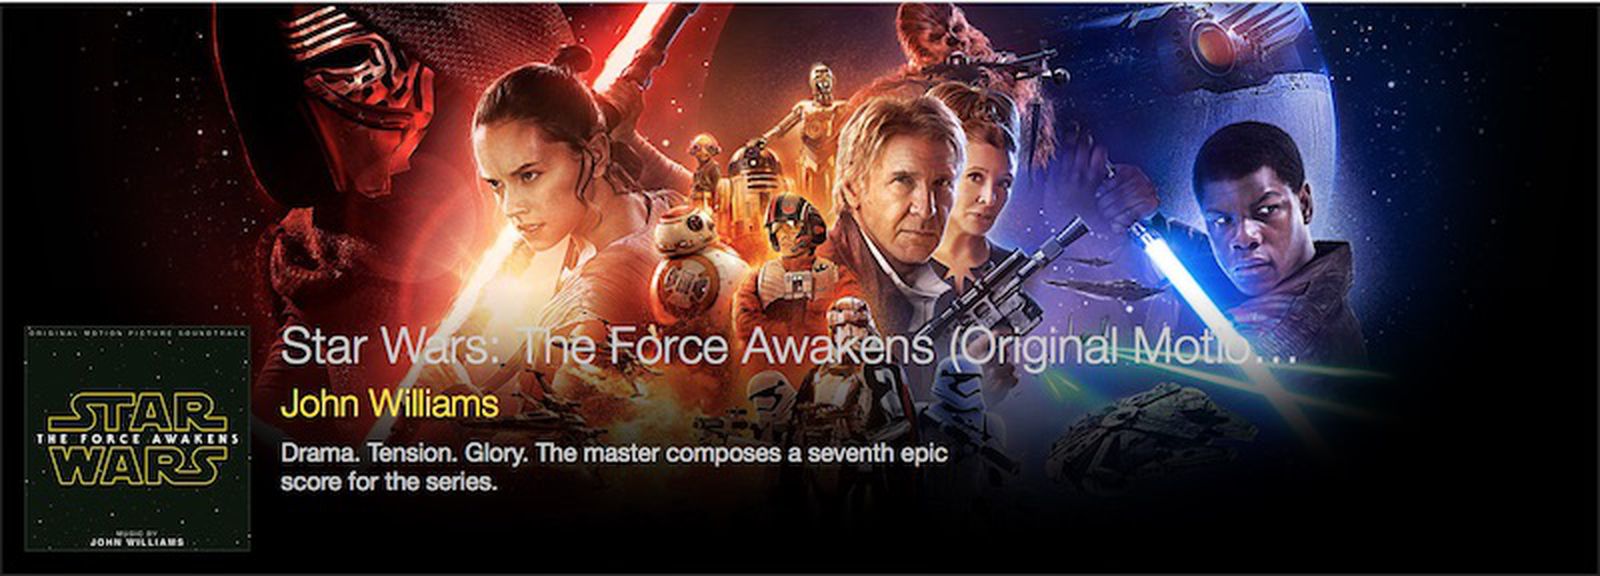 Star Wars: The Force Awakens' Soundtrack Launches on Apple Music